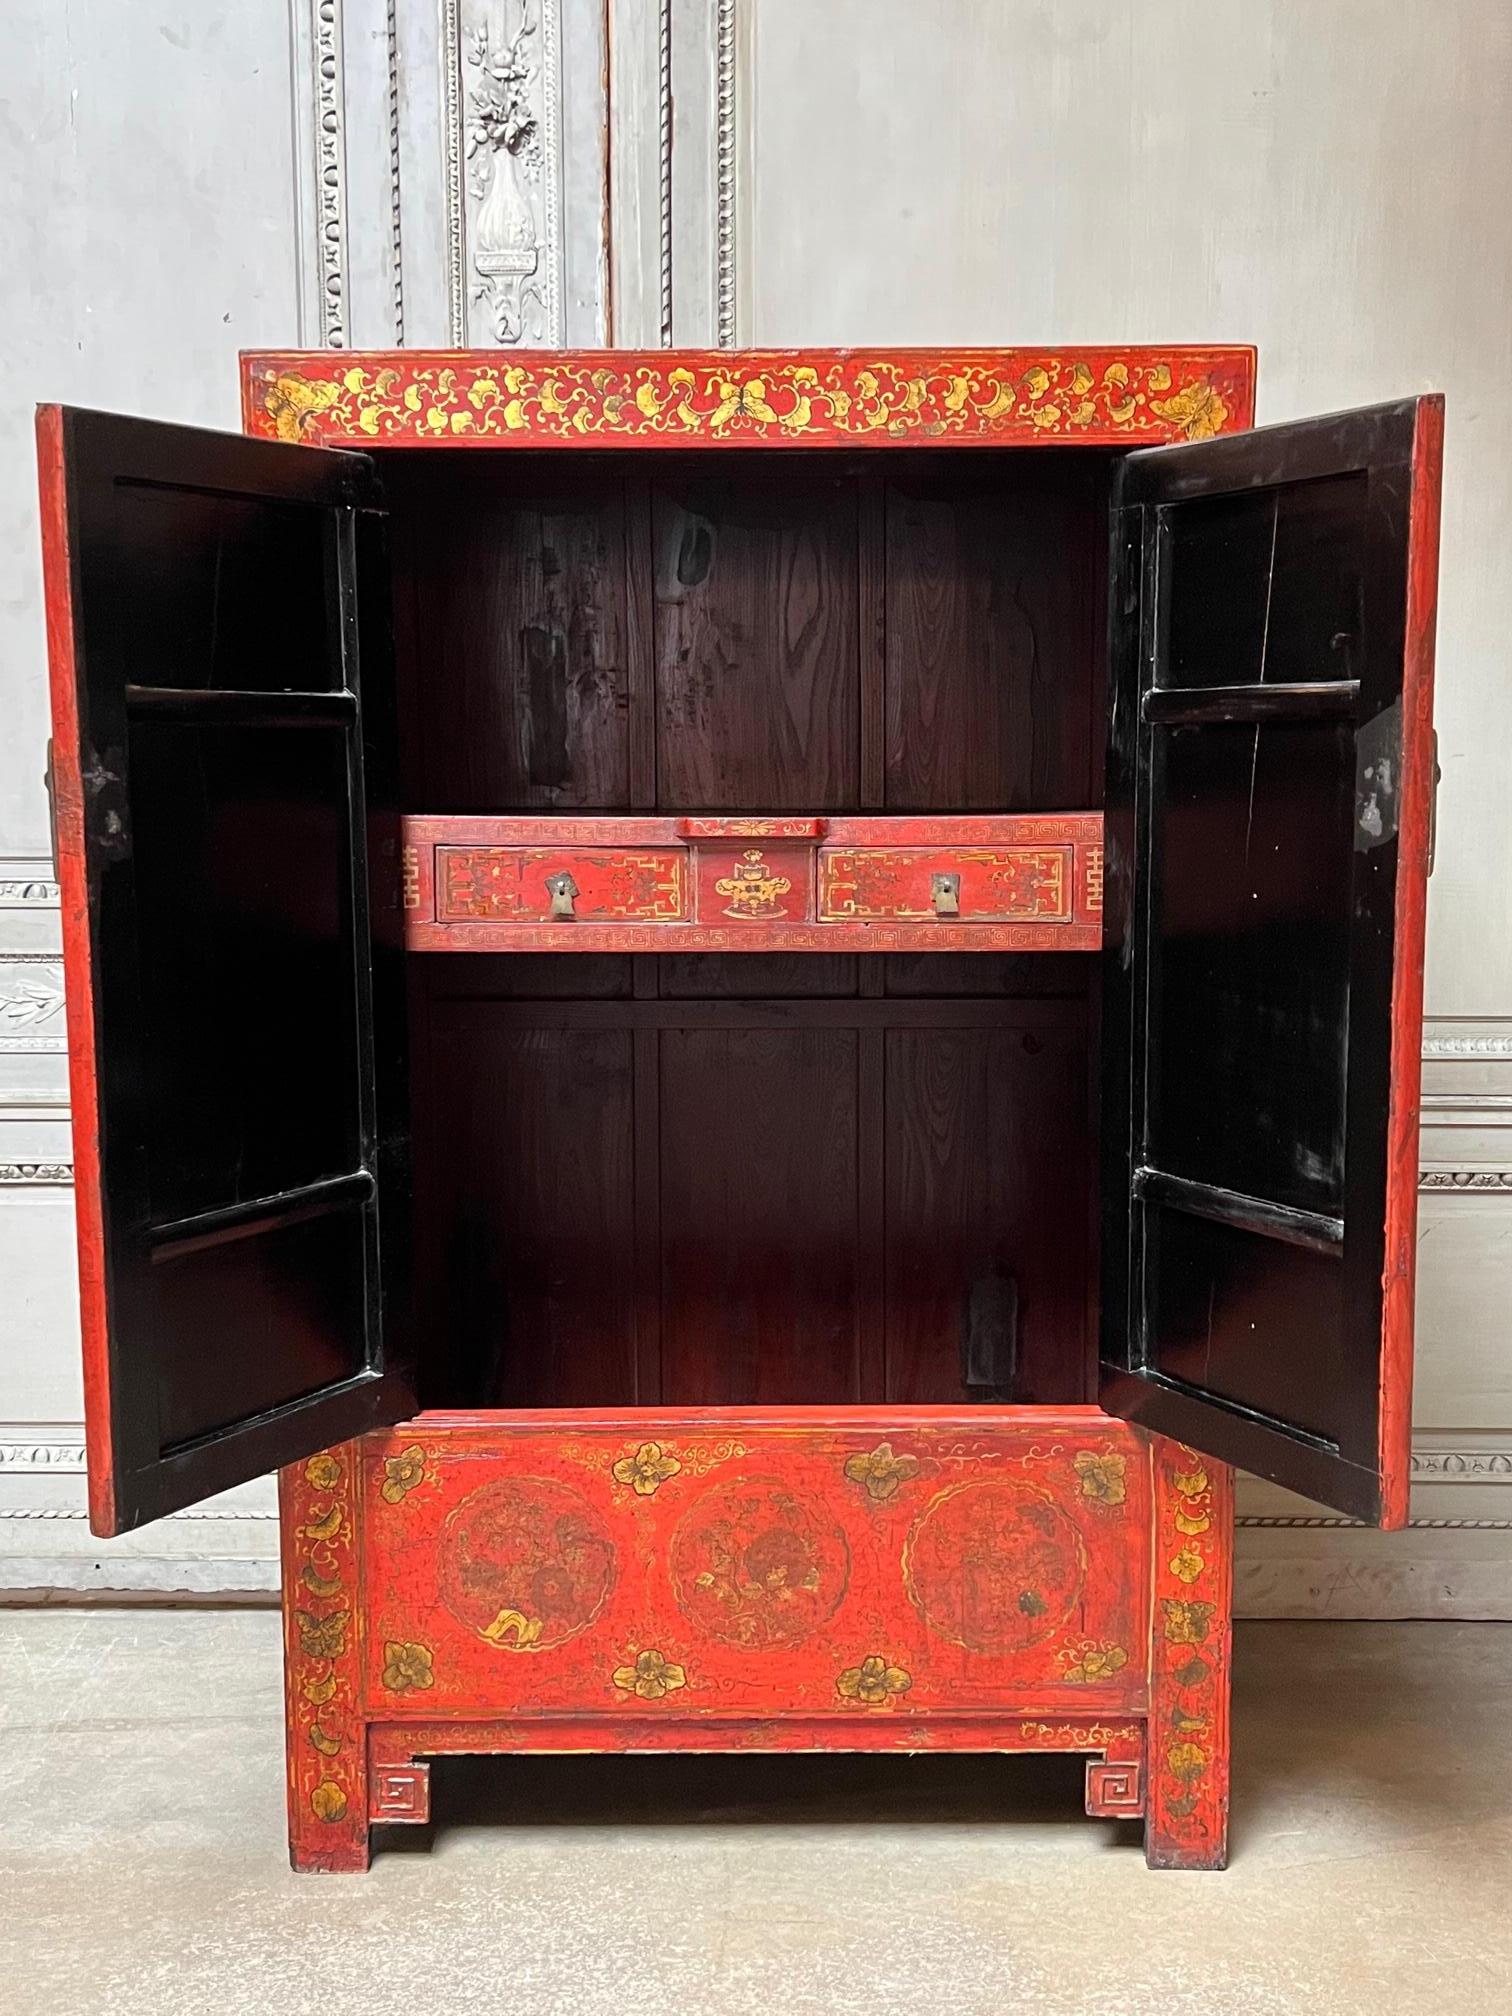 A very decorative red and black lacqured 19th century cabinet from Shanxi China. This cabinet has gilded decoration depicting mountain, foliage and temples with people as well as butterflies. It was probably originally used as a wardrope cabinet and